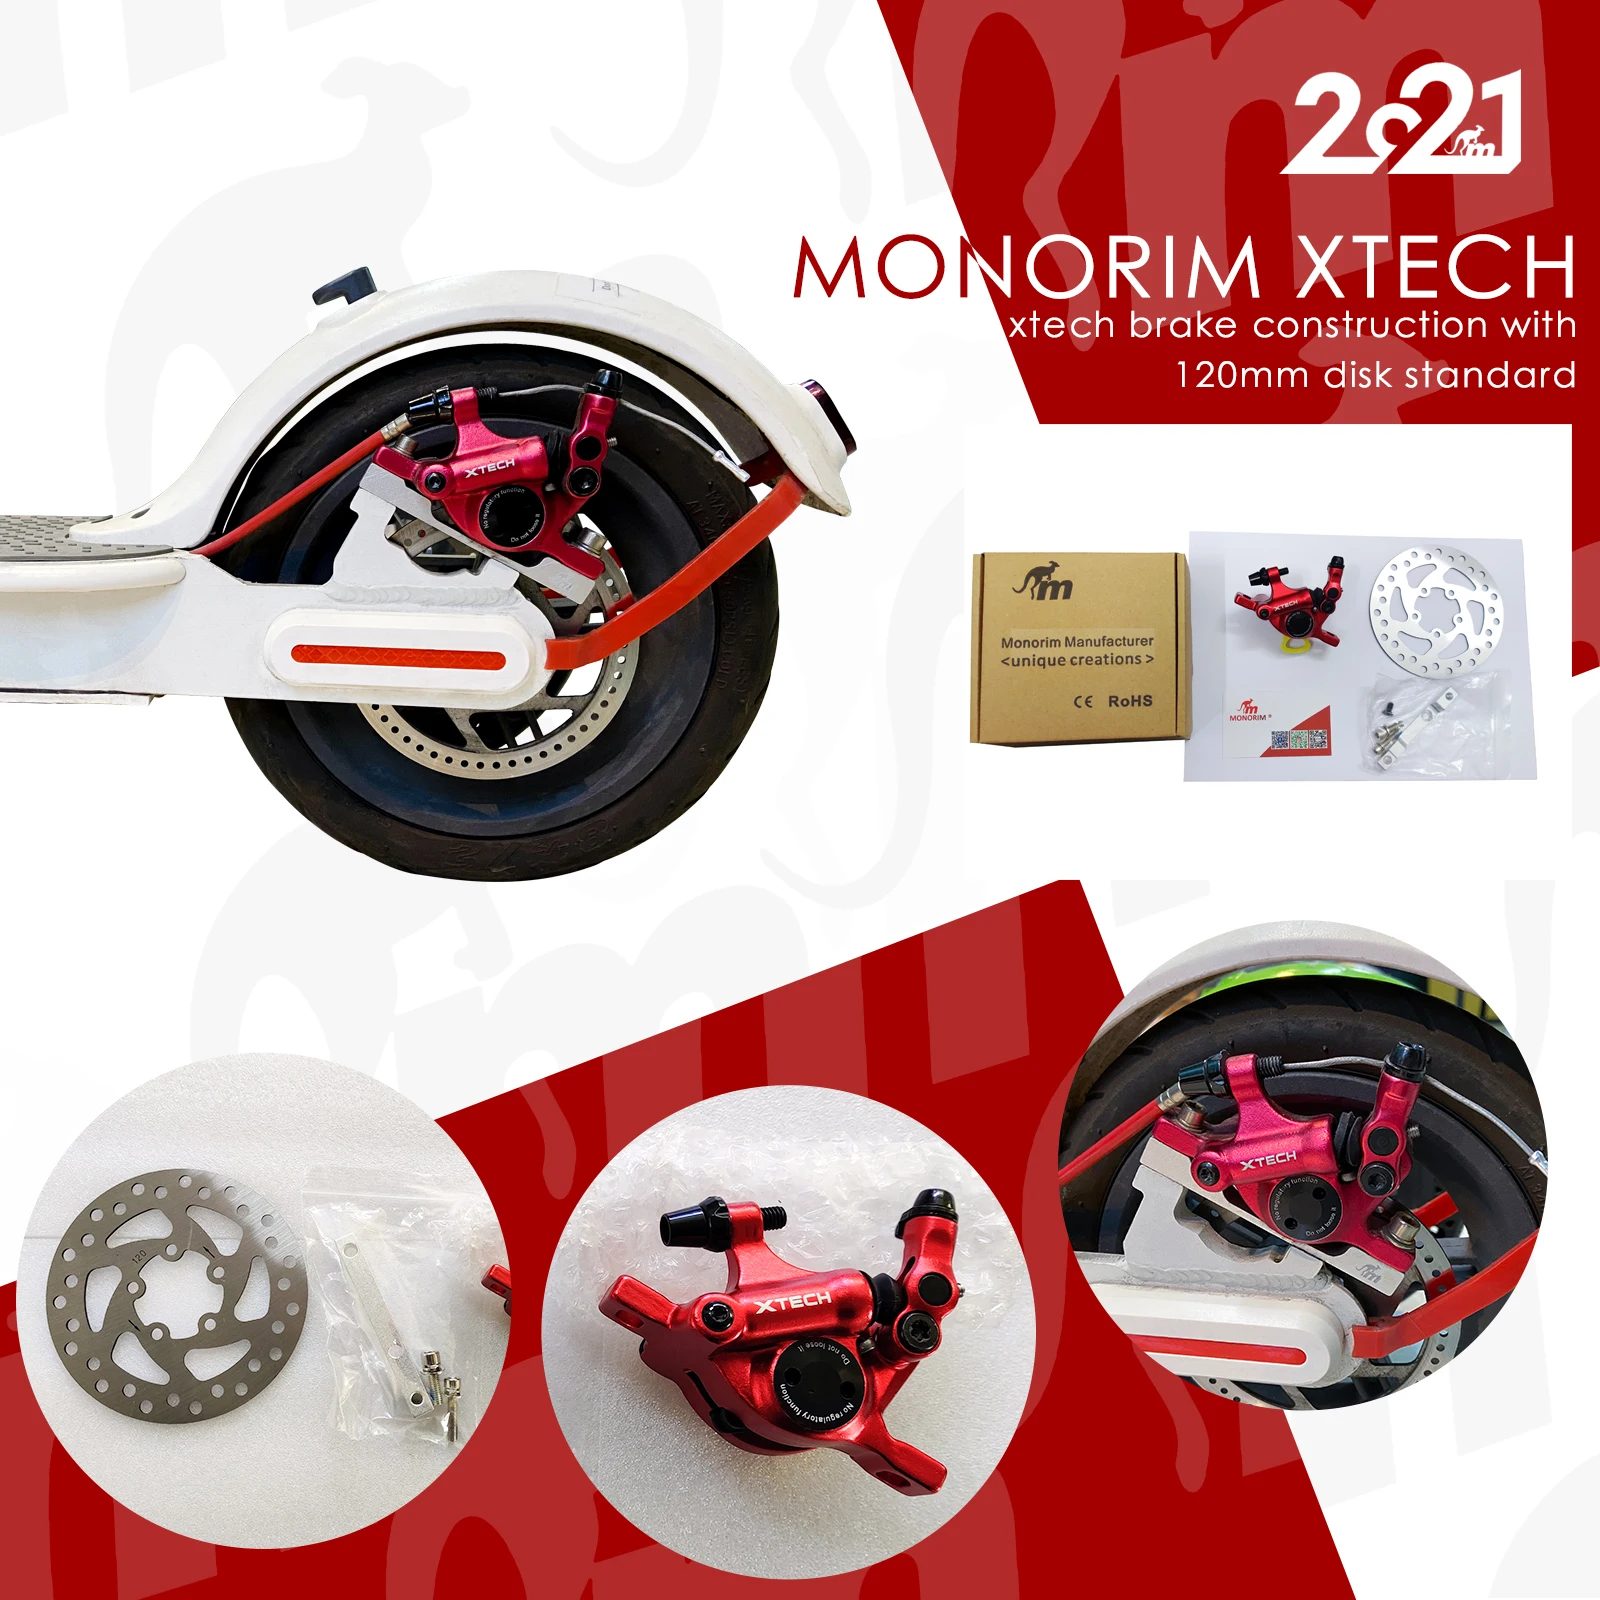 Monorim Xtech For xiaomi m365/1s/essential/pro1/pro2 Brake Construction With 120mm Disk Standard INCLUDES FRAME ADAPTER